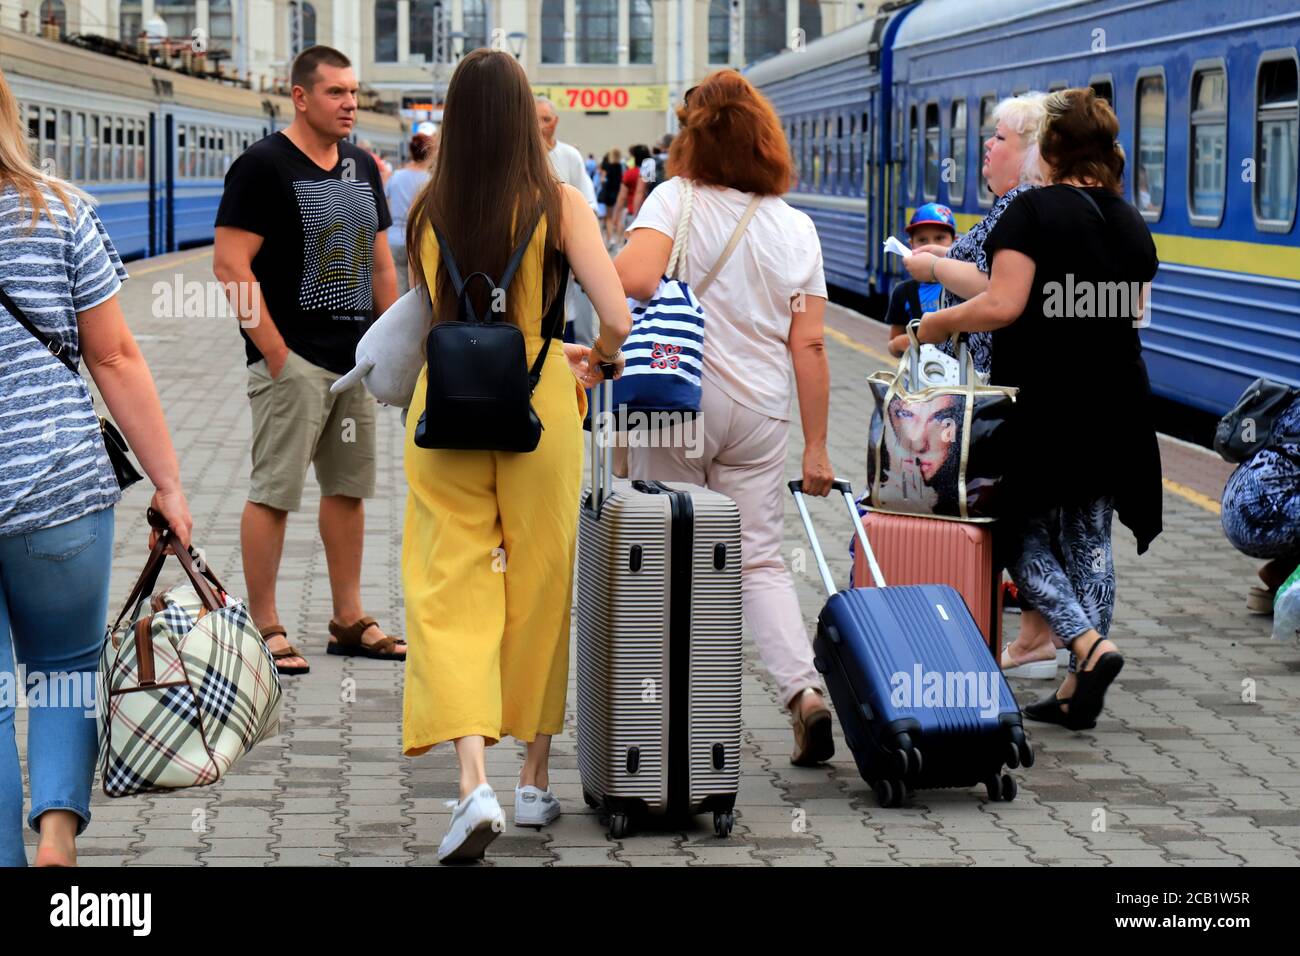 Odesa, Ukraine. 27 07 2020 A crowd of people walking along the platform with bags, suitcases and luggage at the Odessa railway station. Tourists Stock Photo